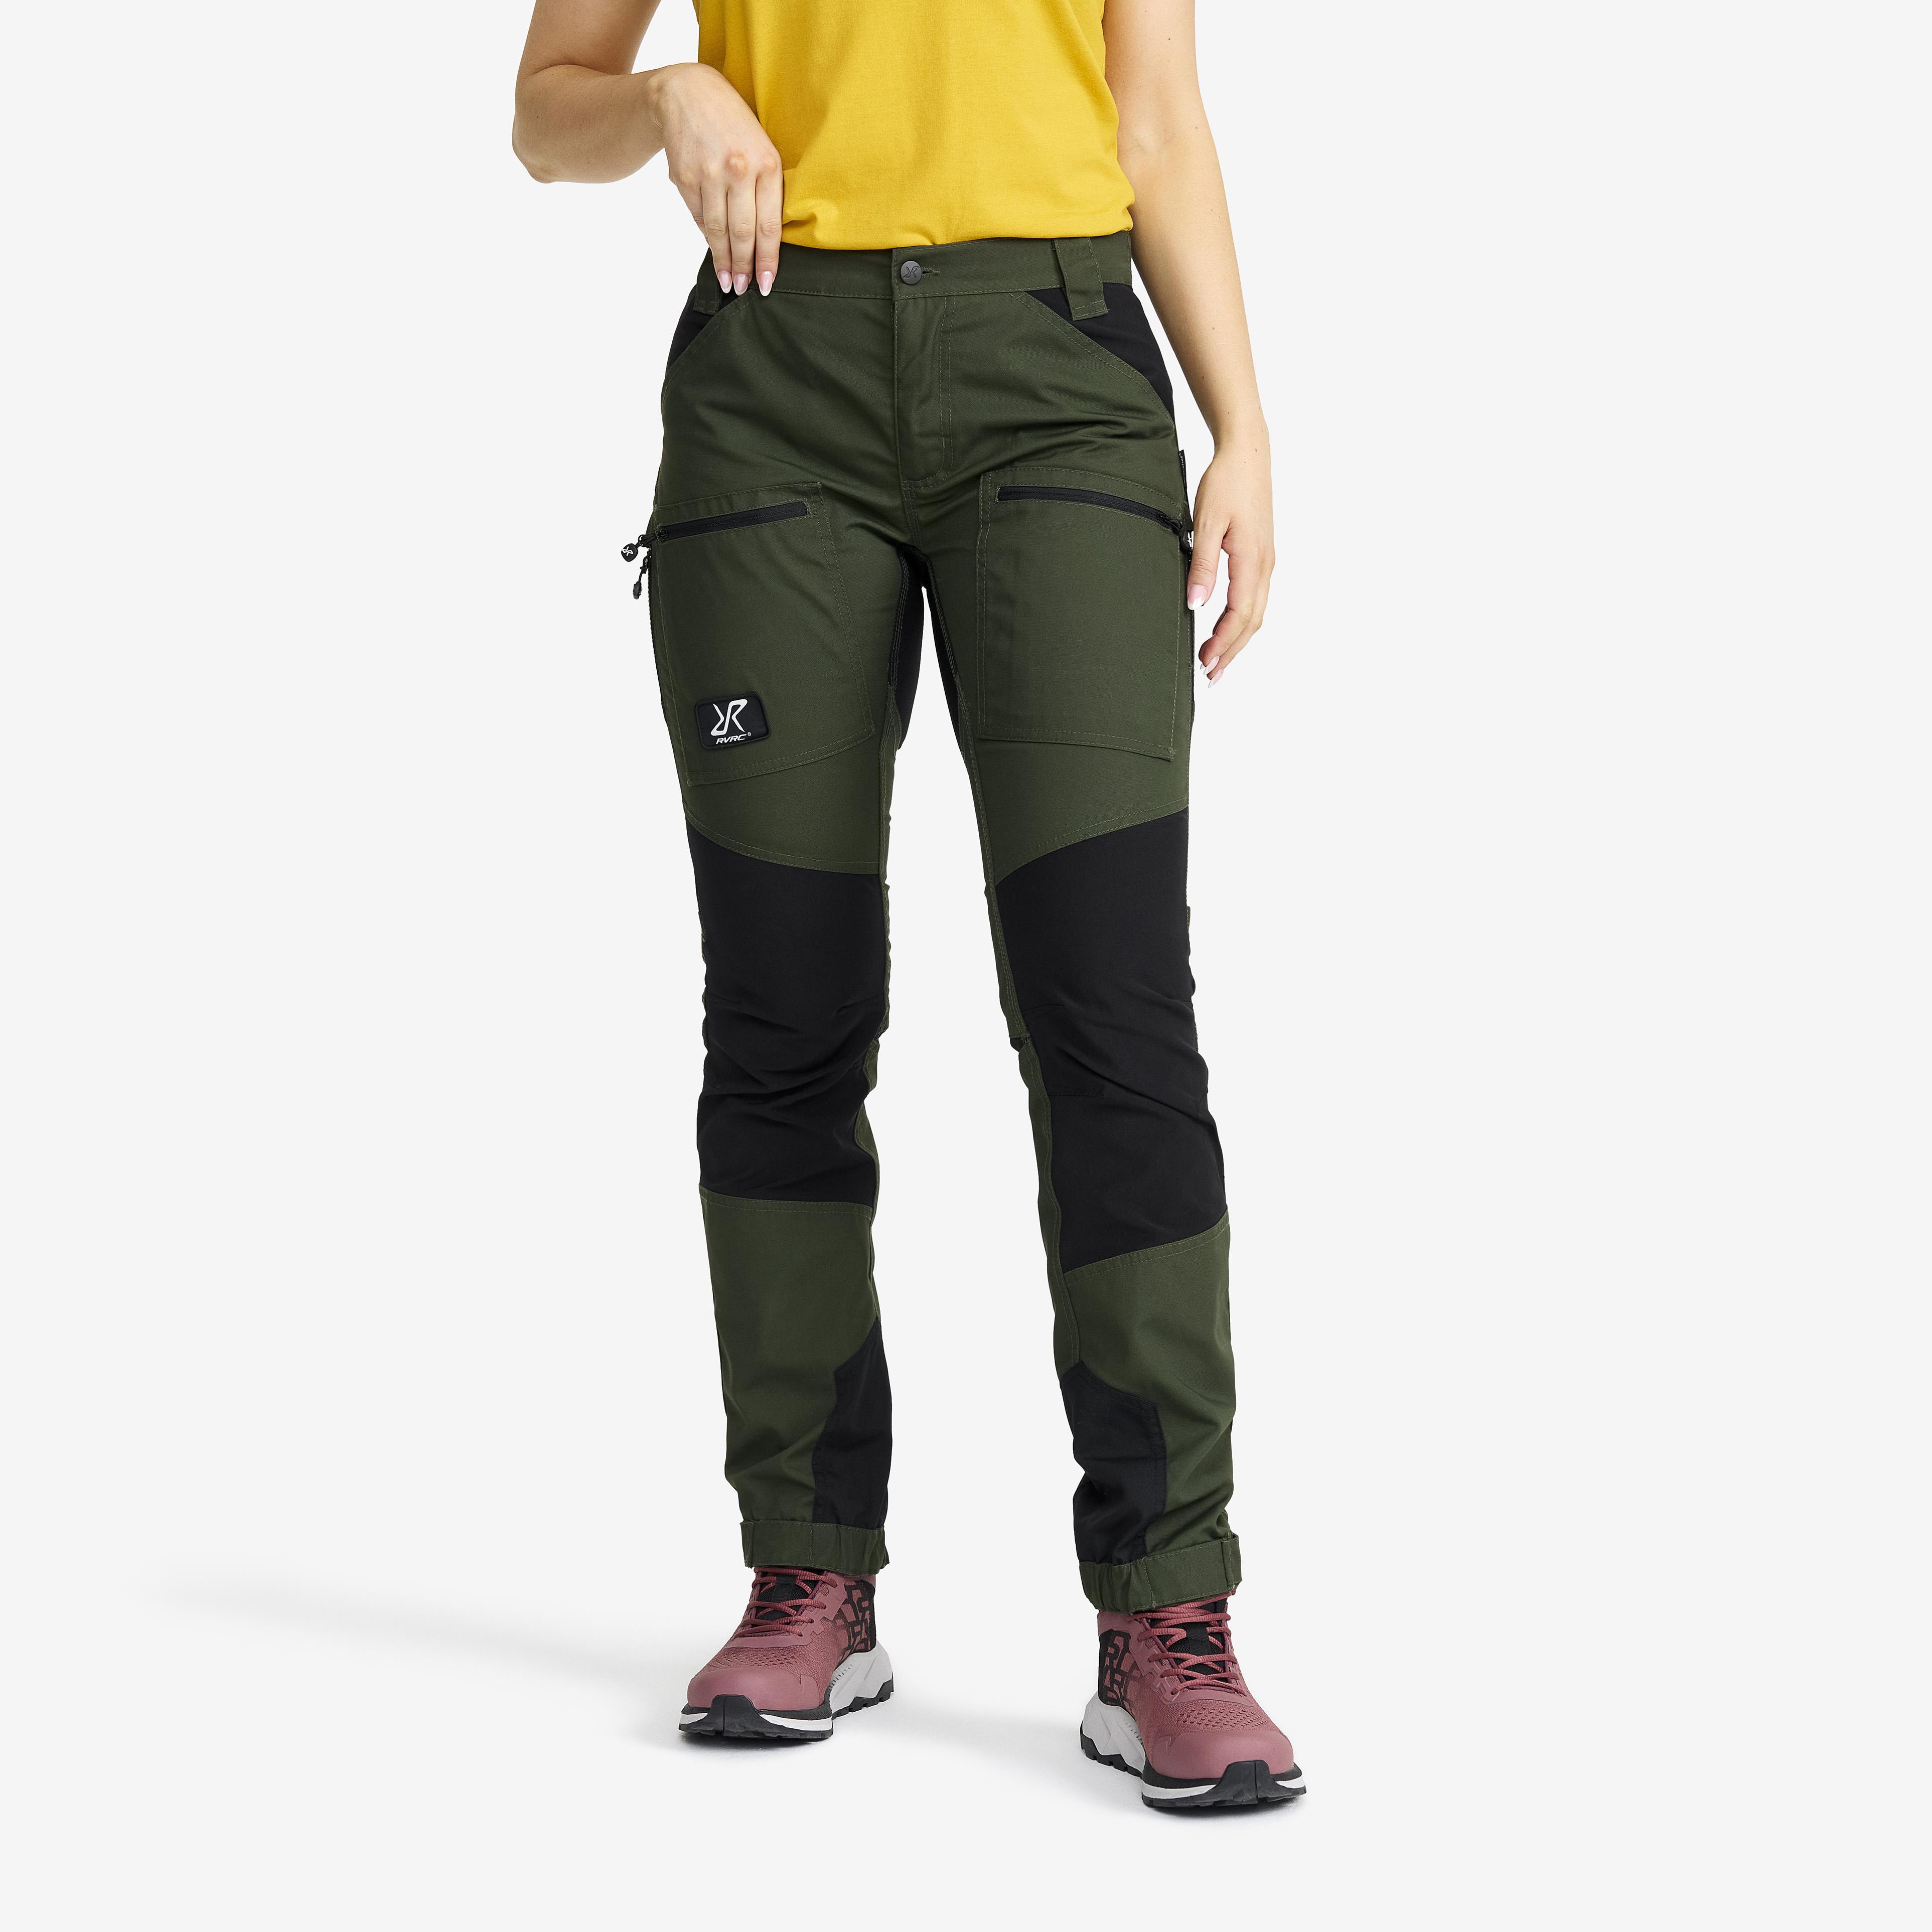 Nordwand Pro hiking pants for women in green